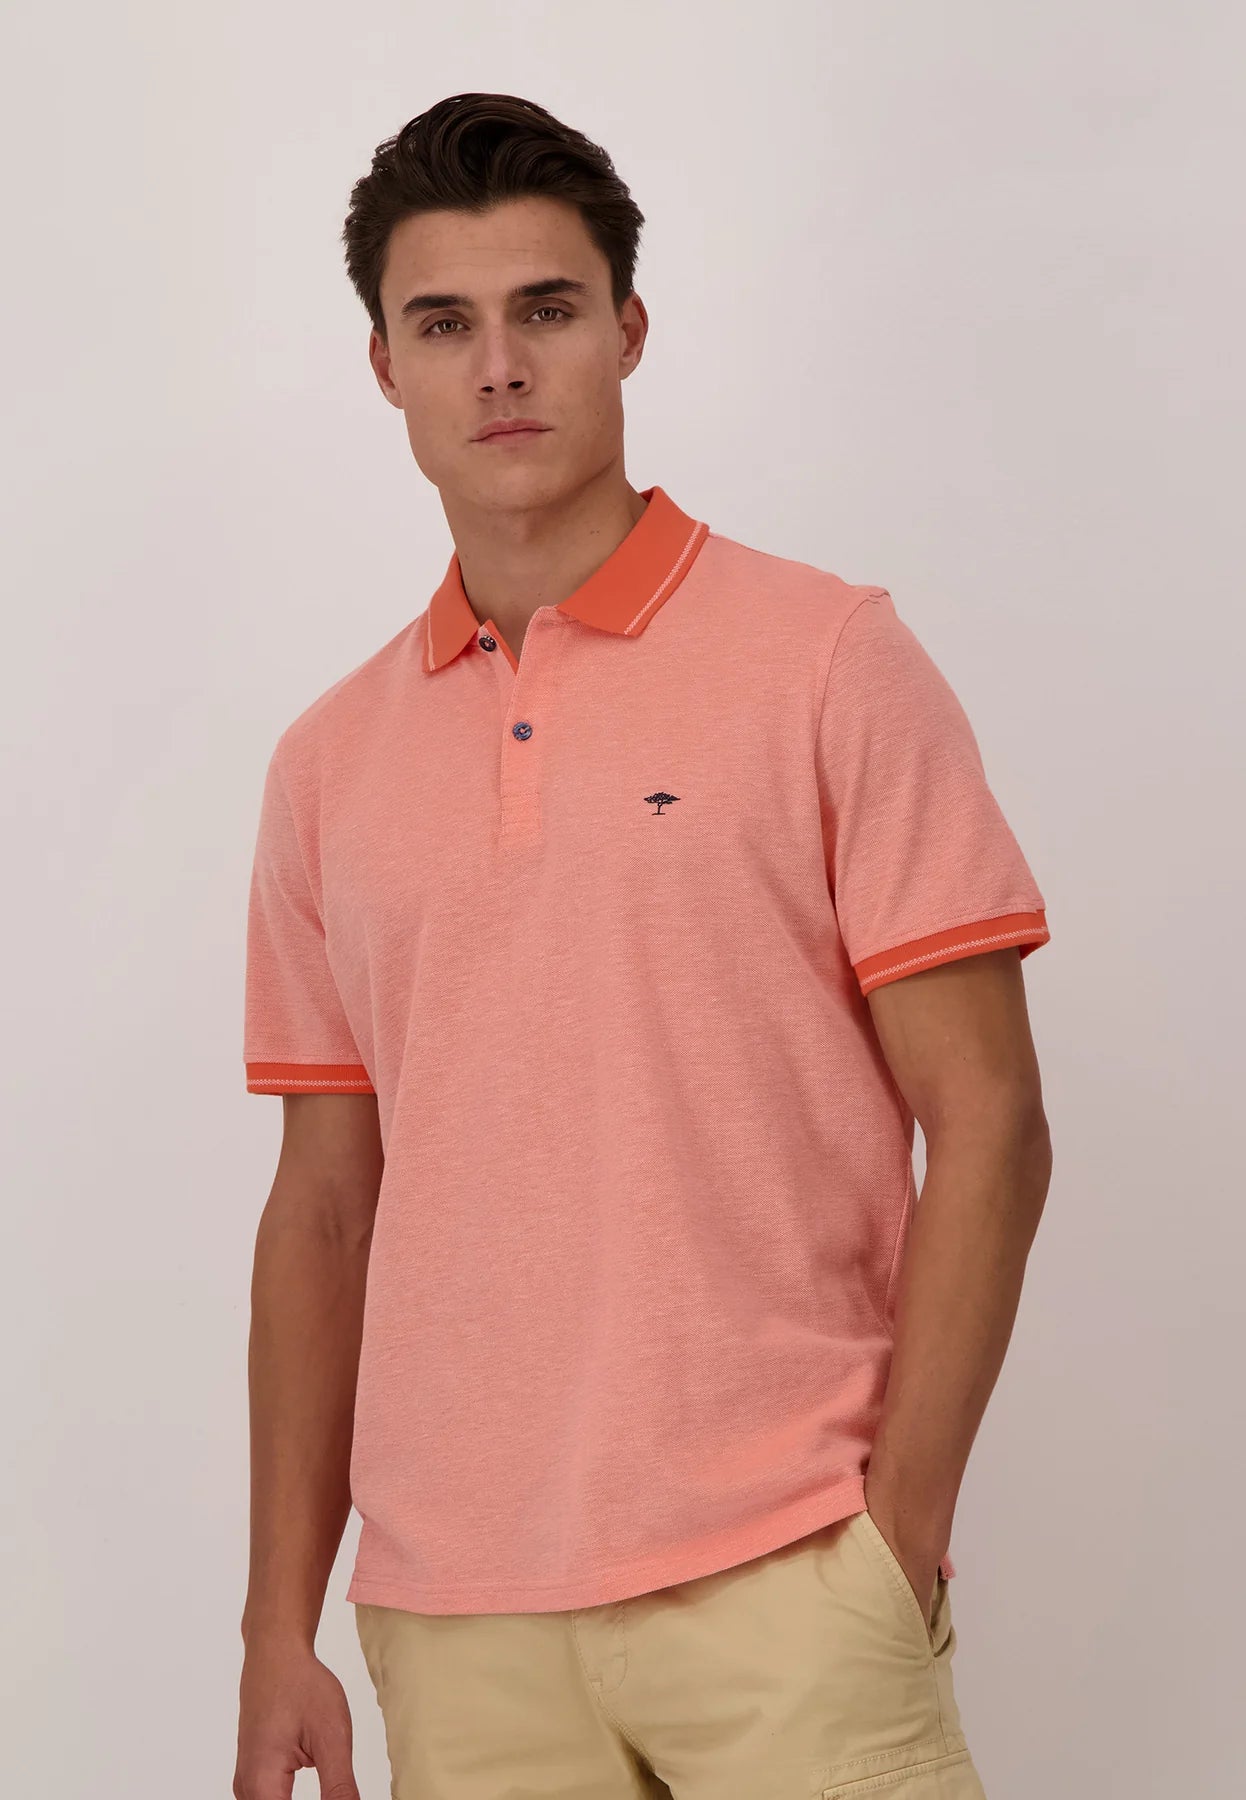 POLO SHIRT IN TWO-TONE LOOK